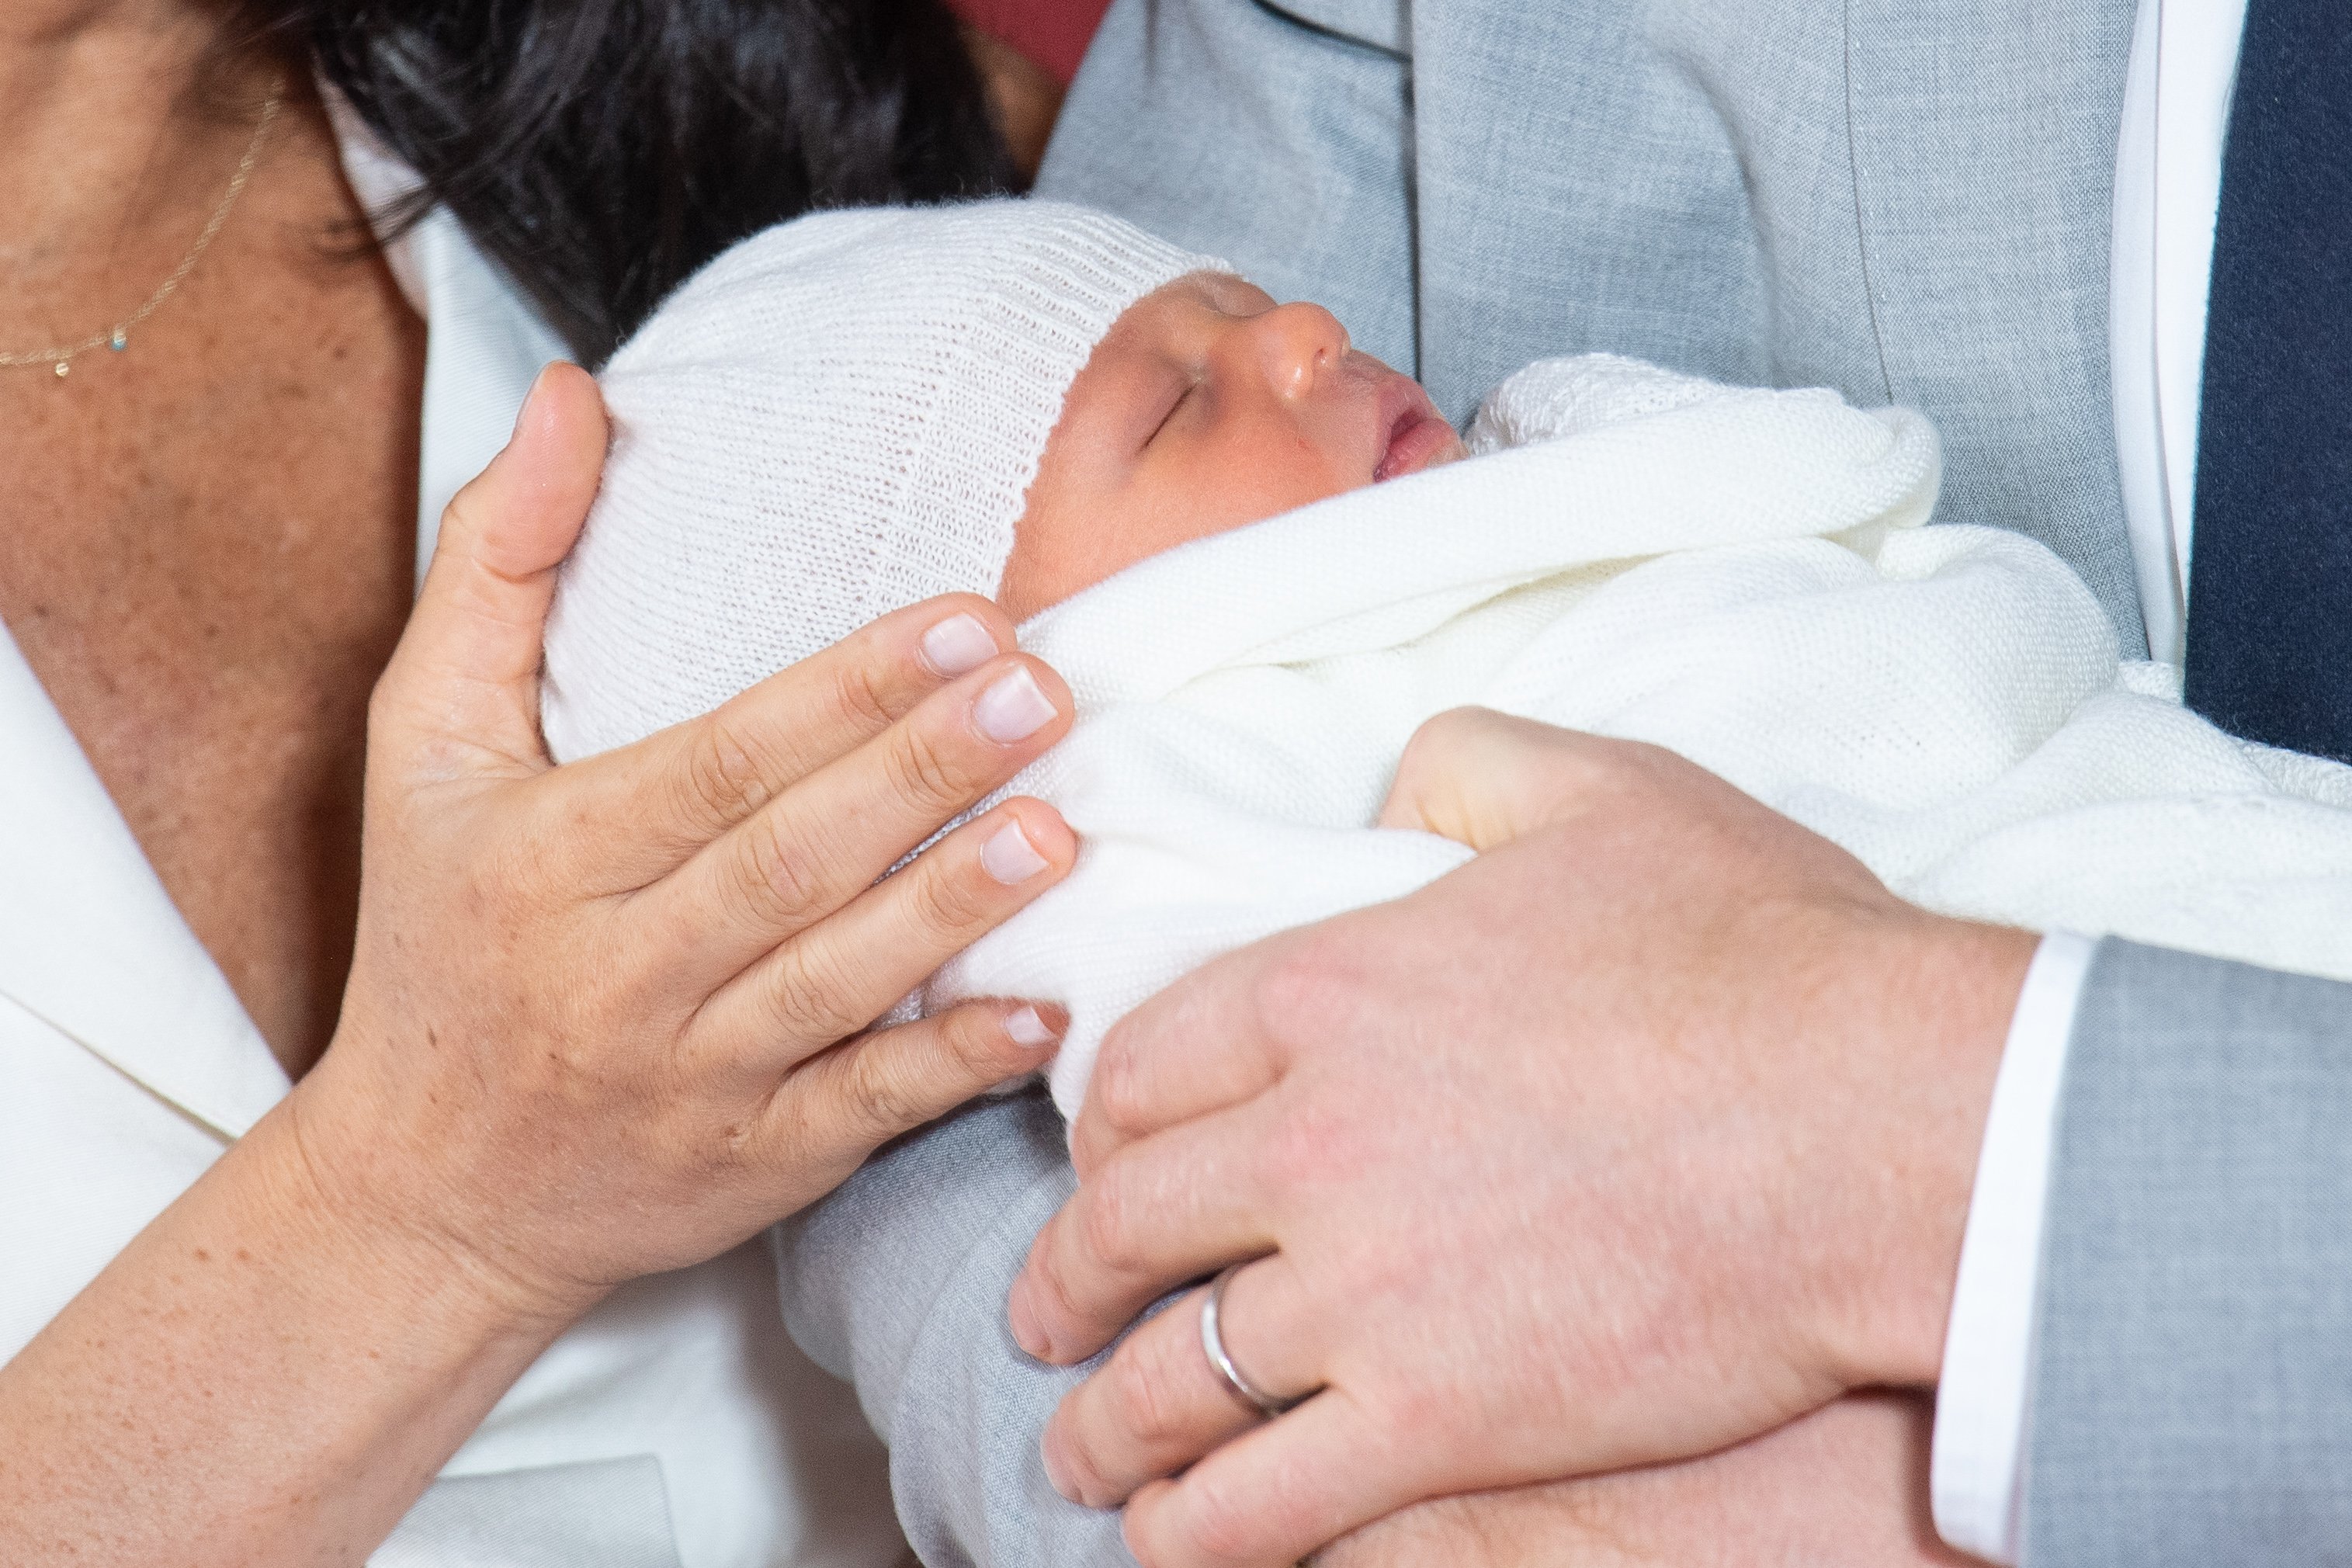 A first closeup of Prince Harry and Meghan Marke's newborn son on Wednesday May 8, 2019 | Photo: Getty Images